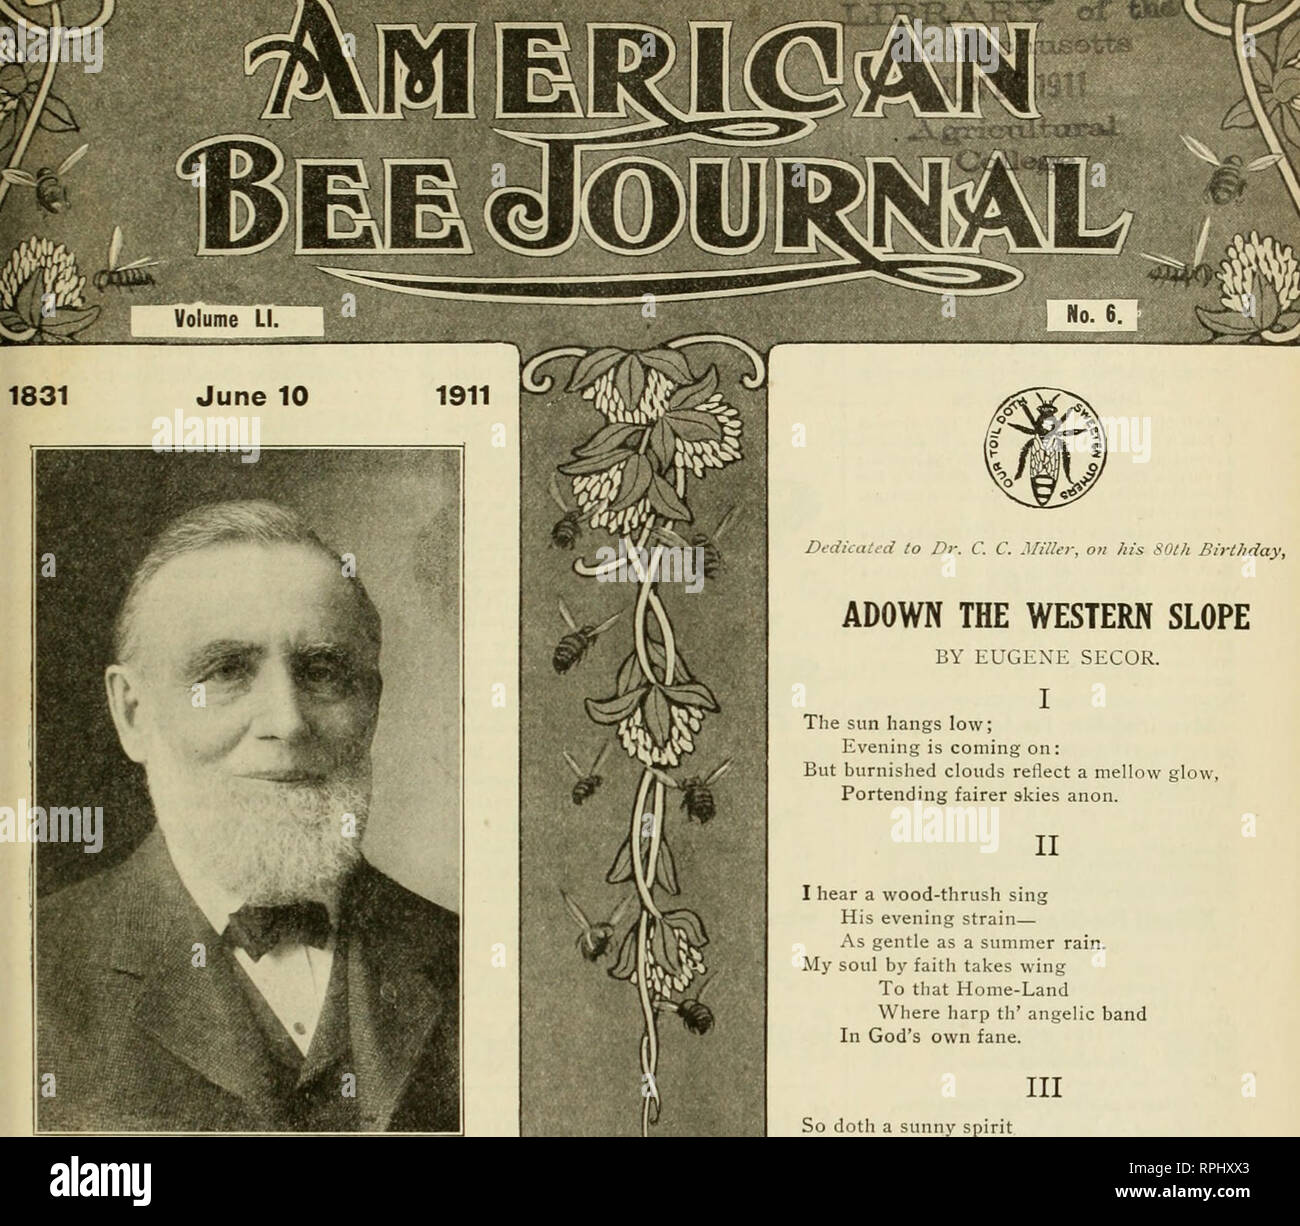 . American bee journal. Bee culture; Bees. 7^^.. Dr. C. C. MILLER, MARENGO, ILL. The Nestor of American Bee-Keeping. E^SSSS &quot;With the chance To get more happiness out of each day so long as my days may last; and With the chance To have them last longer than in any other busi- ness. Why shouldn't I be a bee-keeper:&quot; —Dr. MiUer, in American Bee Journal, fagc 3 •. cniiEjL^ I Dedicated to Dr. C. C. Miller, on his 80th Birthday, »l»^*/-v' A.ii^^«^*^ UNE I 1911 ? ADOWN THE WESTERN SLOPE BY EUGEXE SECOR. The sun hangs low; Evening is coming on: But burnished clouds reflect a mellow glow, Po Stock Photo